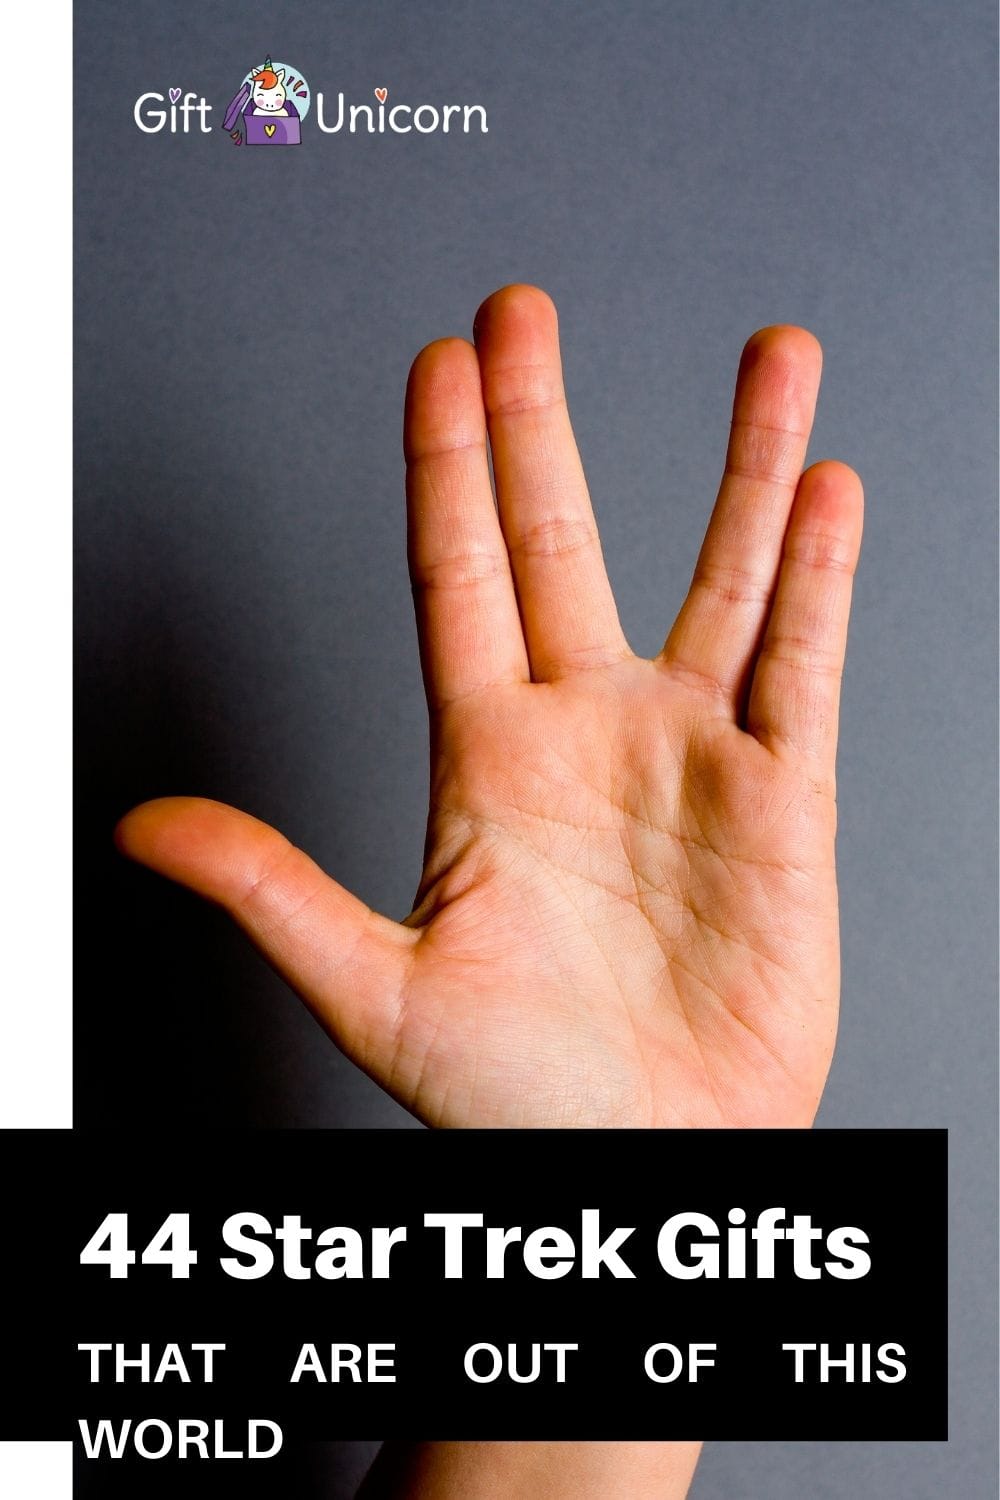 44 Star Trek Gifts That Are Out of This World - pinterest pin image